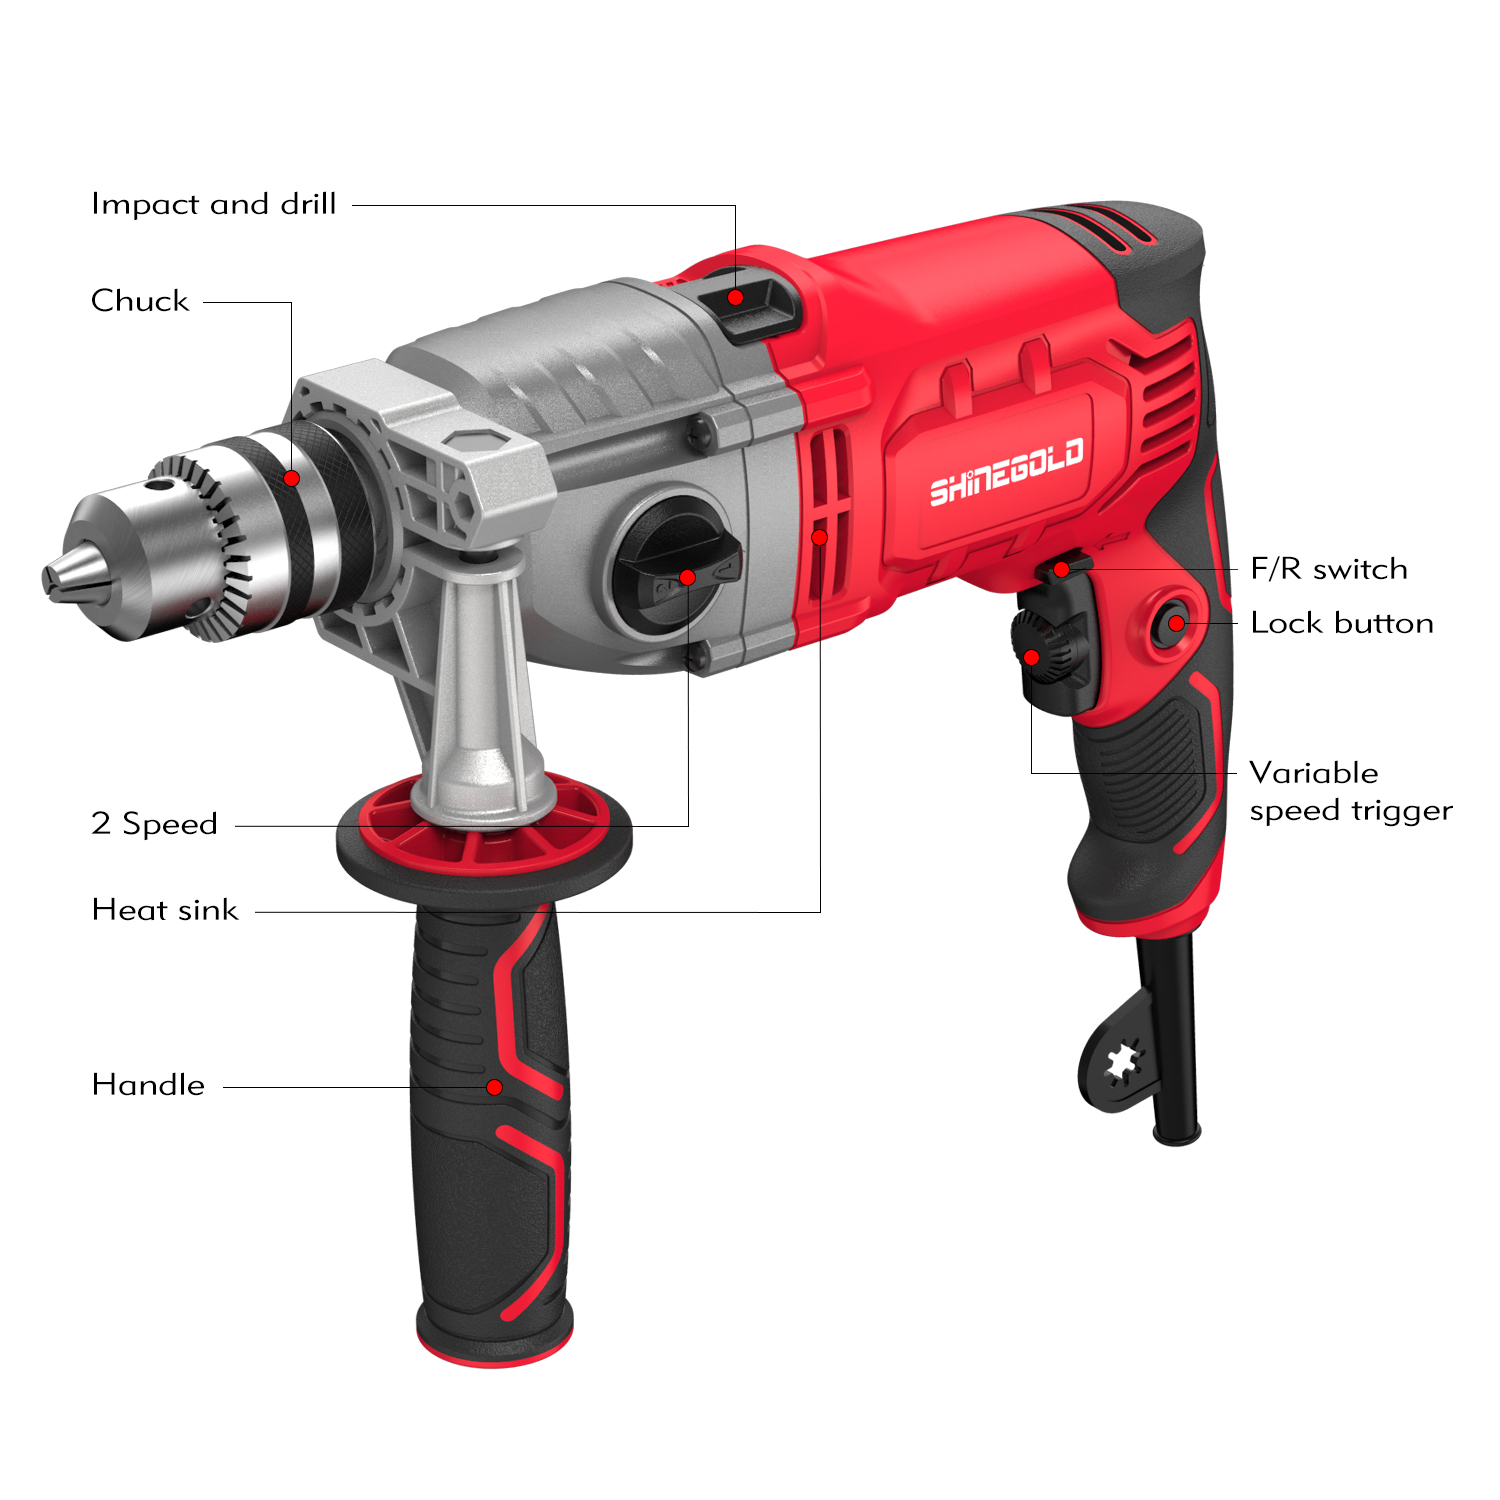 1050W Input Power Professional Powerful Double Speed Impact Drill 13MM Variable Speed